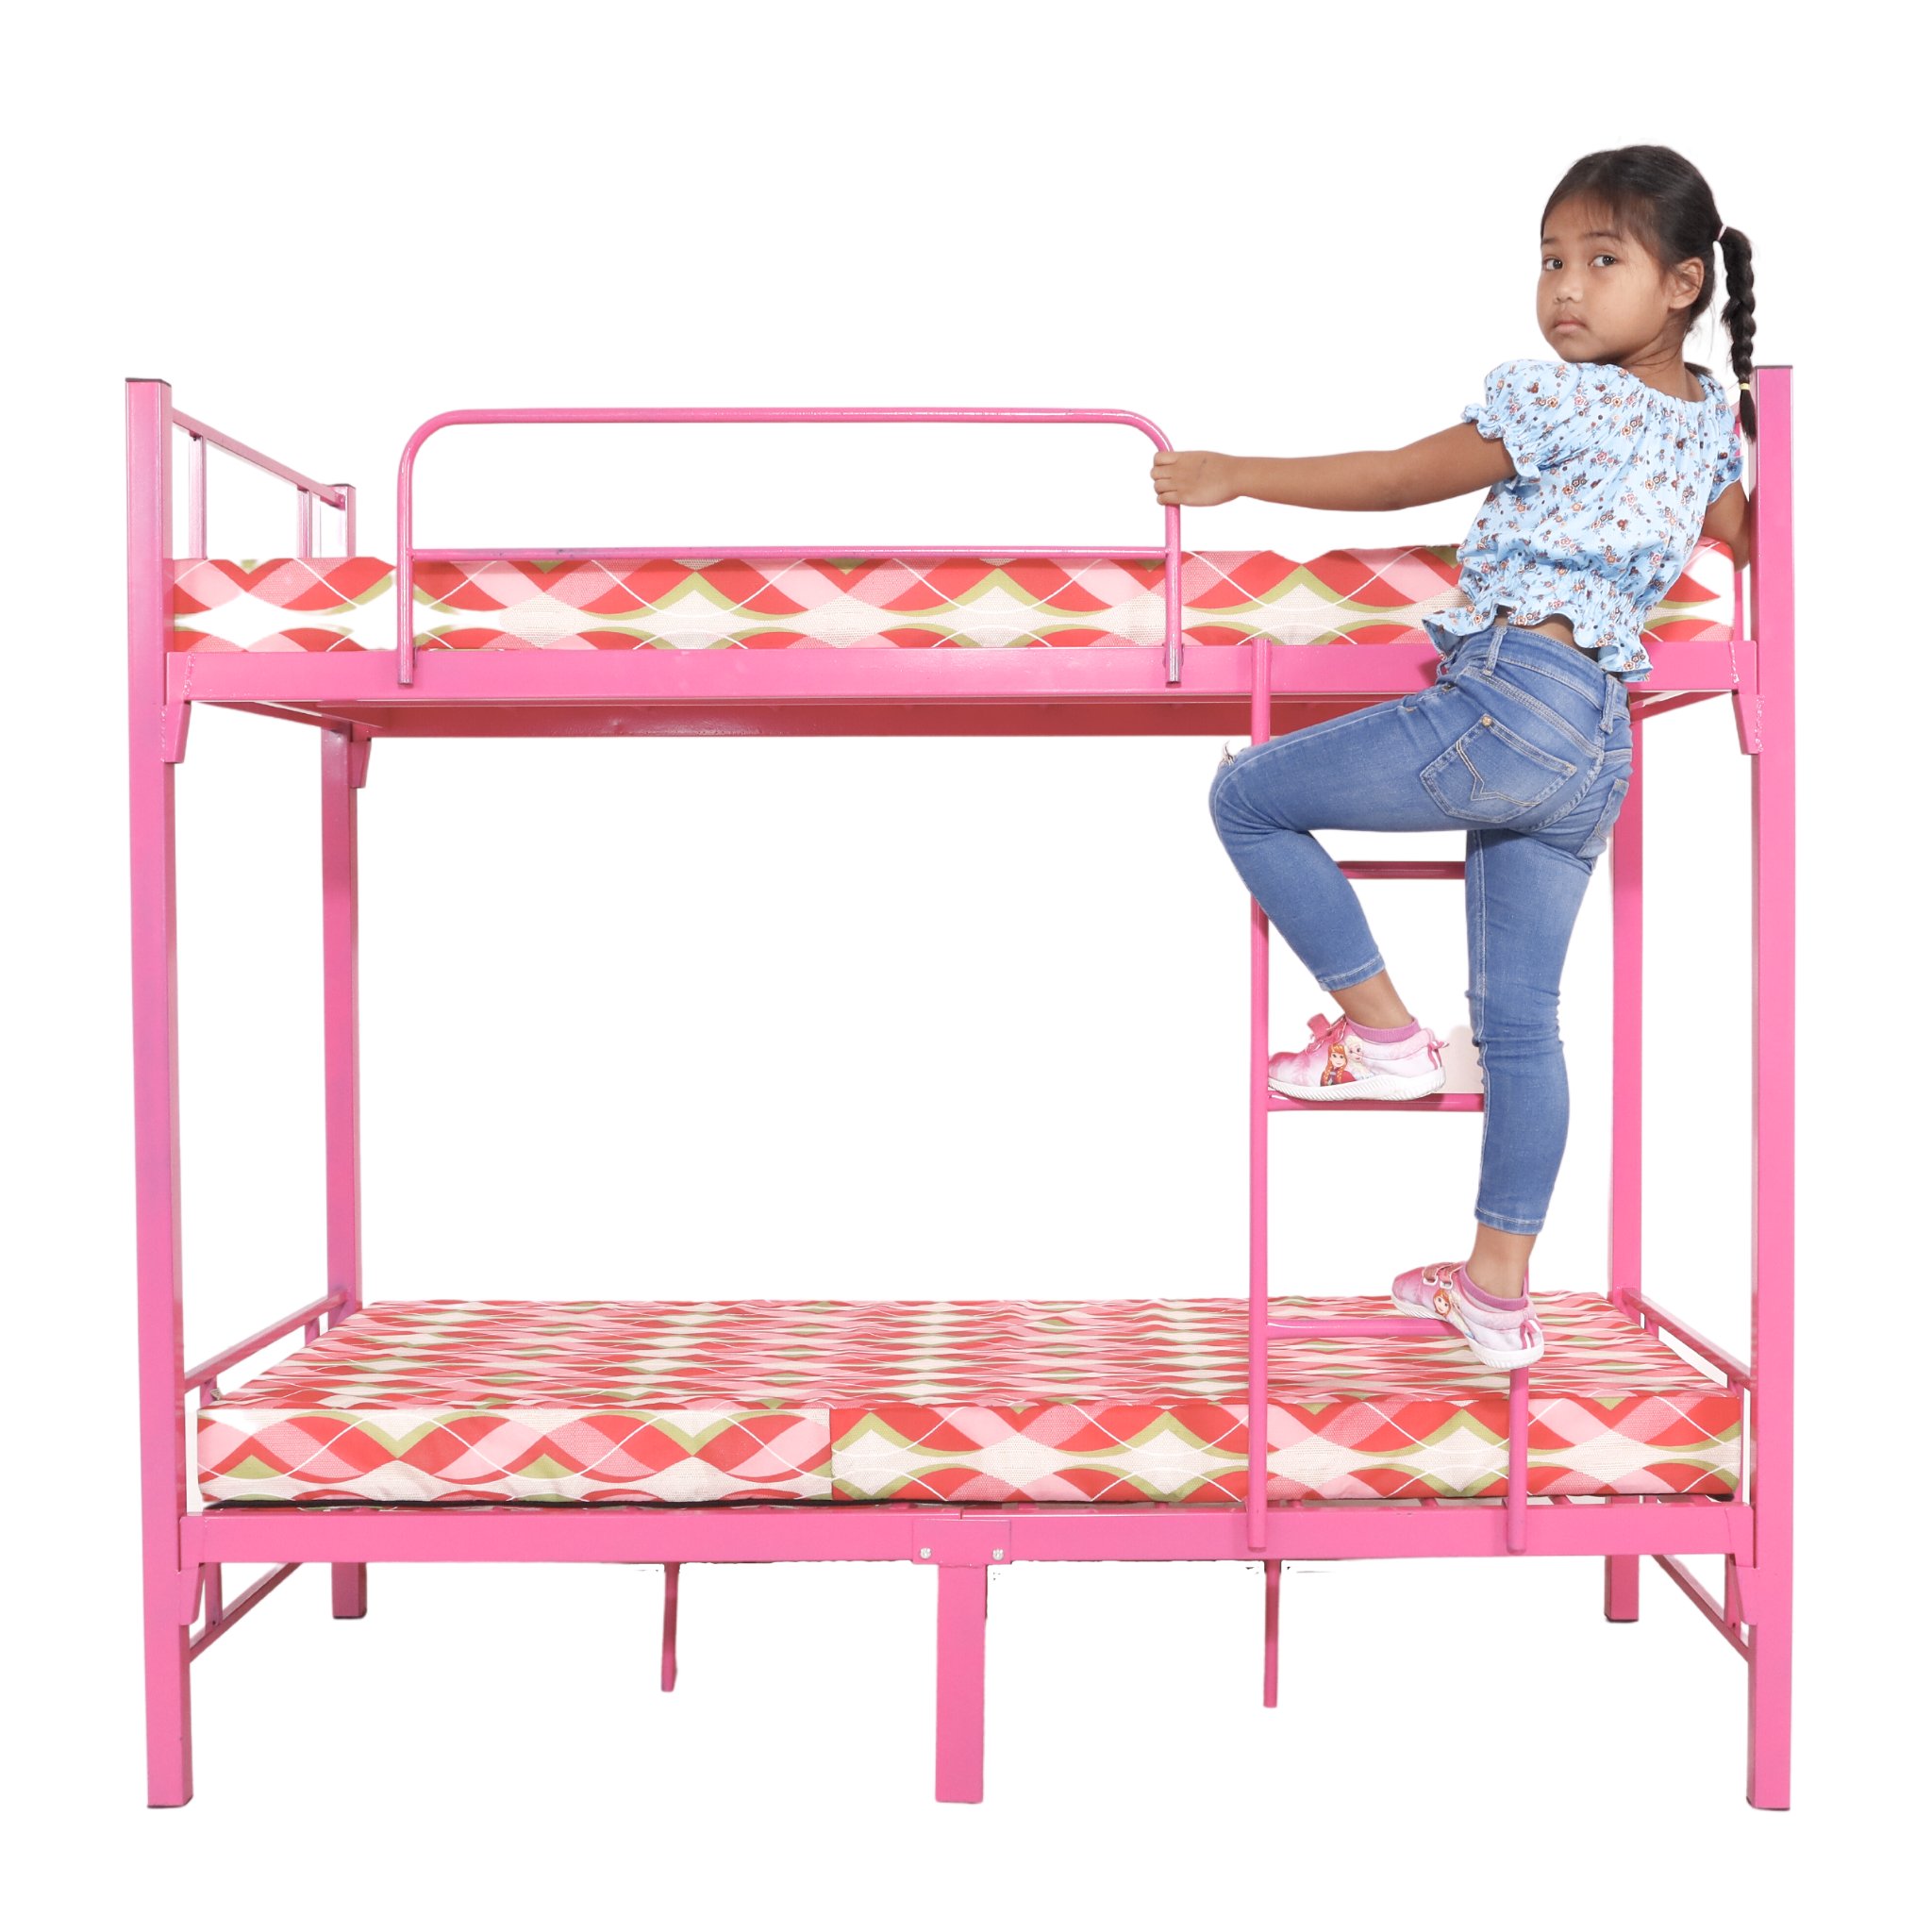 PIA Children Double Deck Bed with free matress AF Home